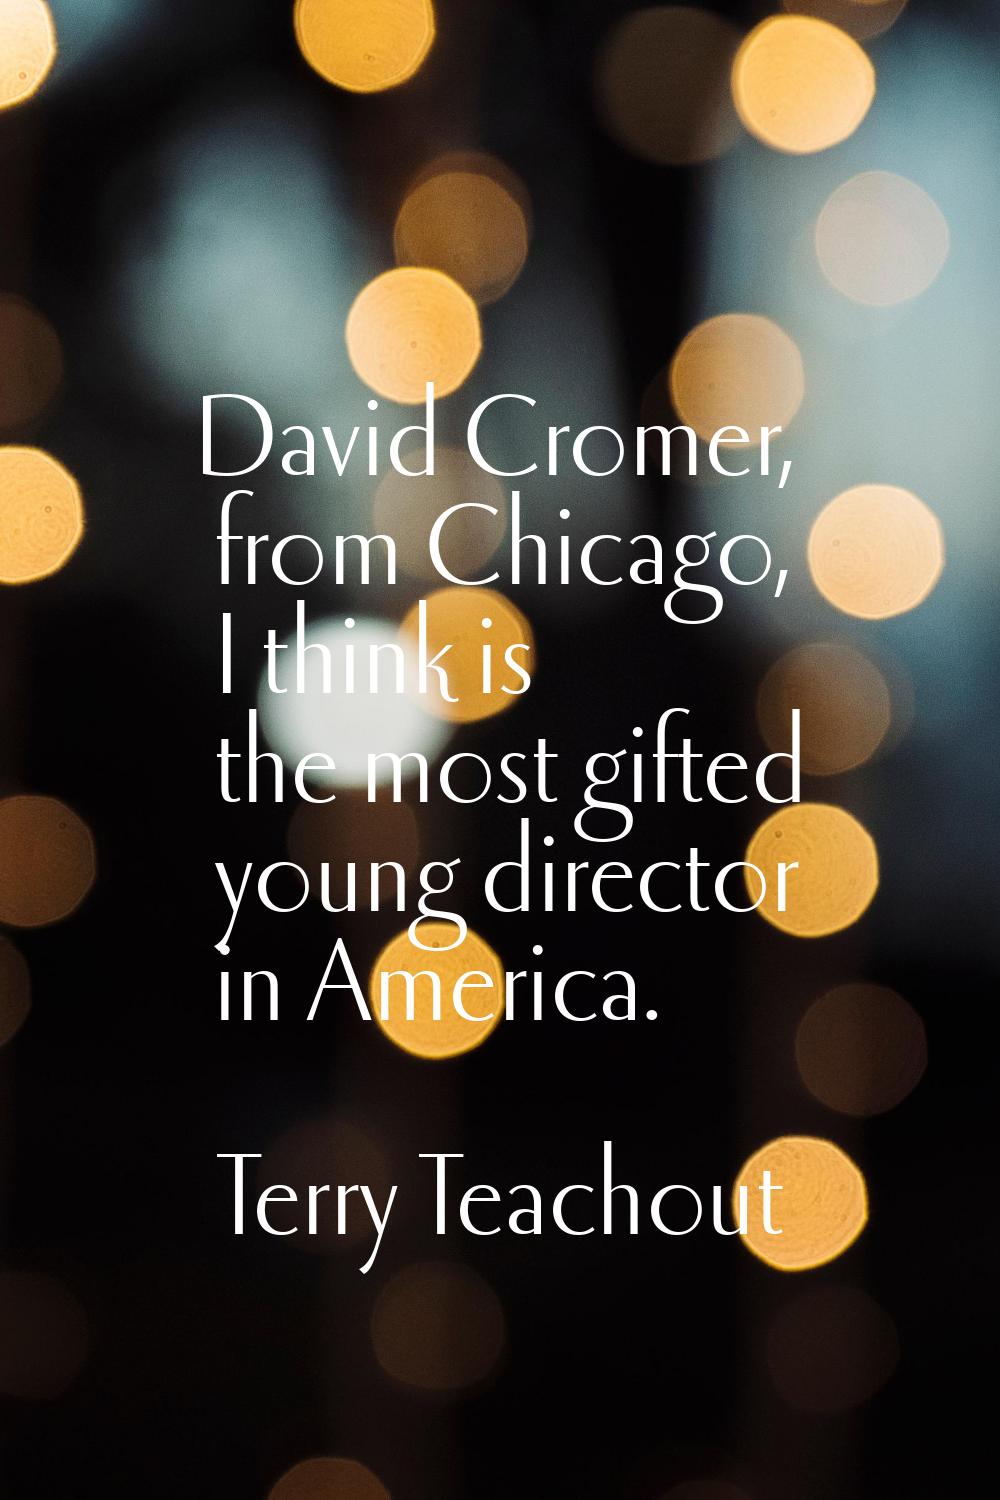 David Cromer, from Chicago, I think is the most gifted young director in America.